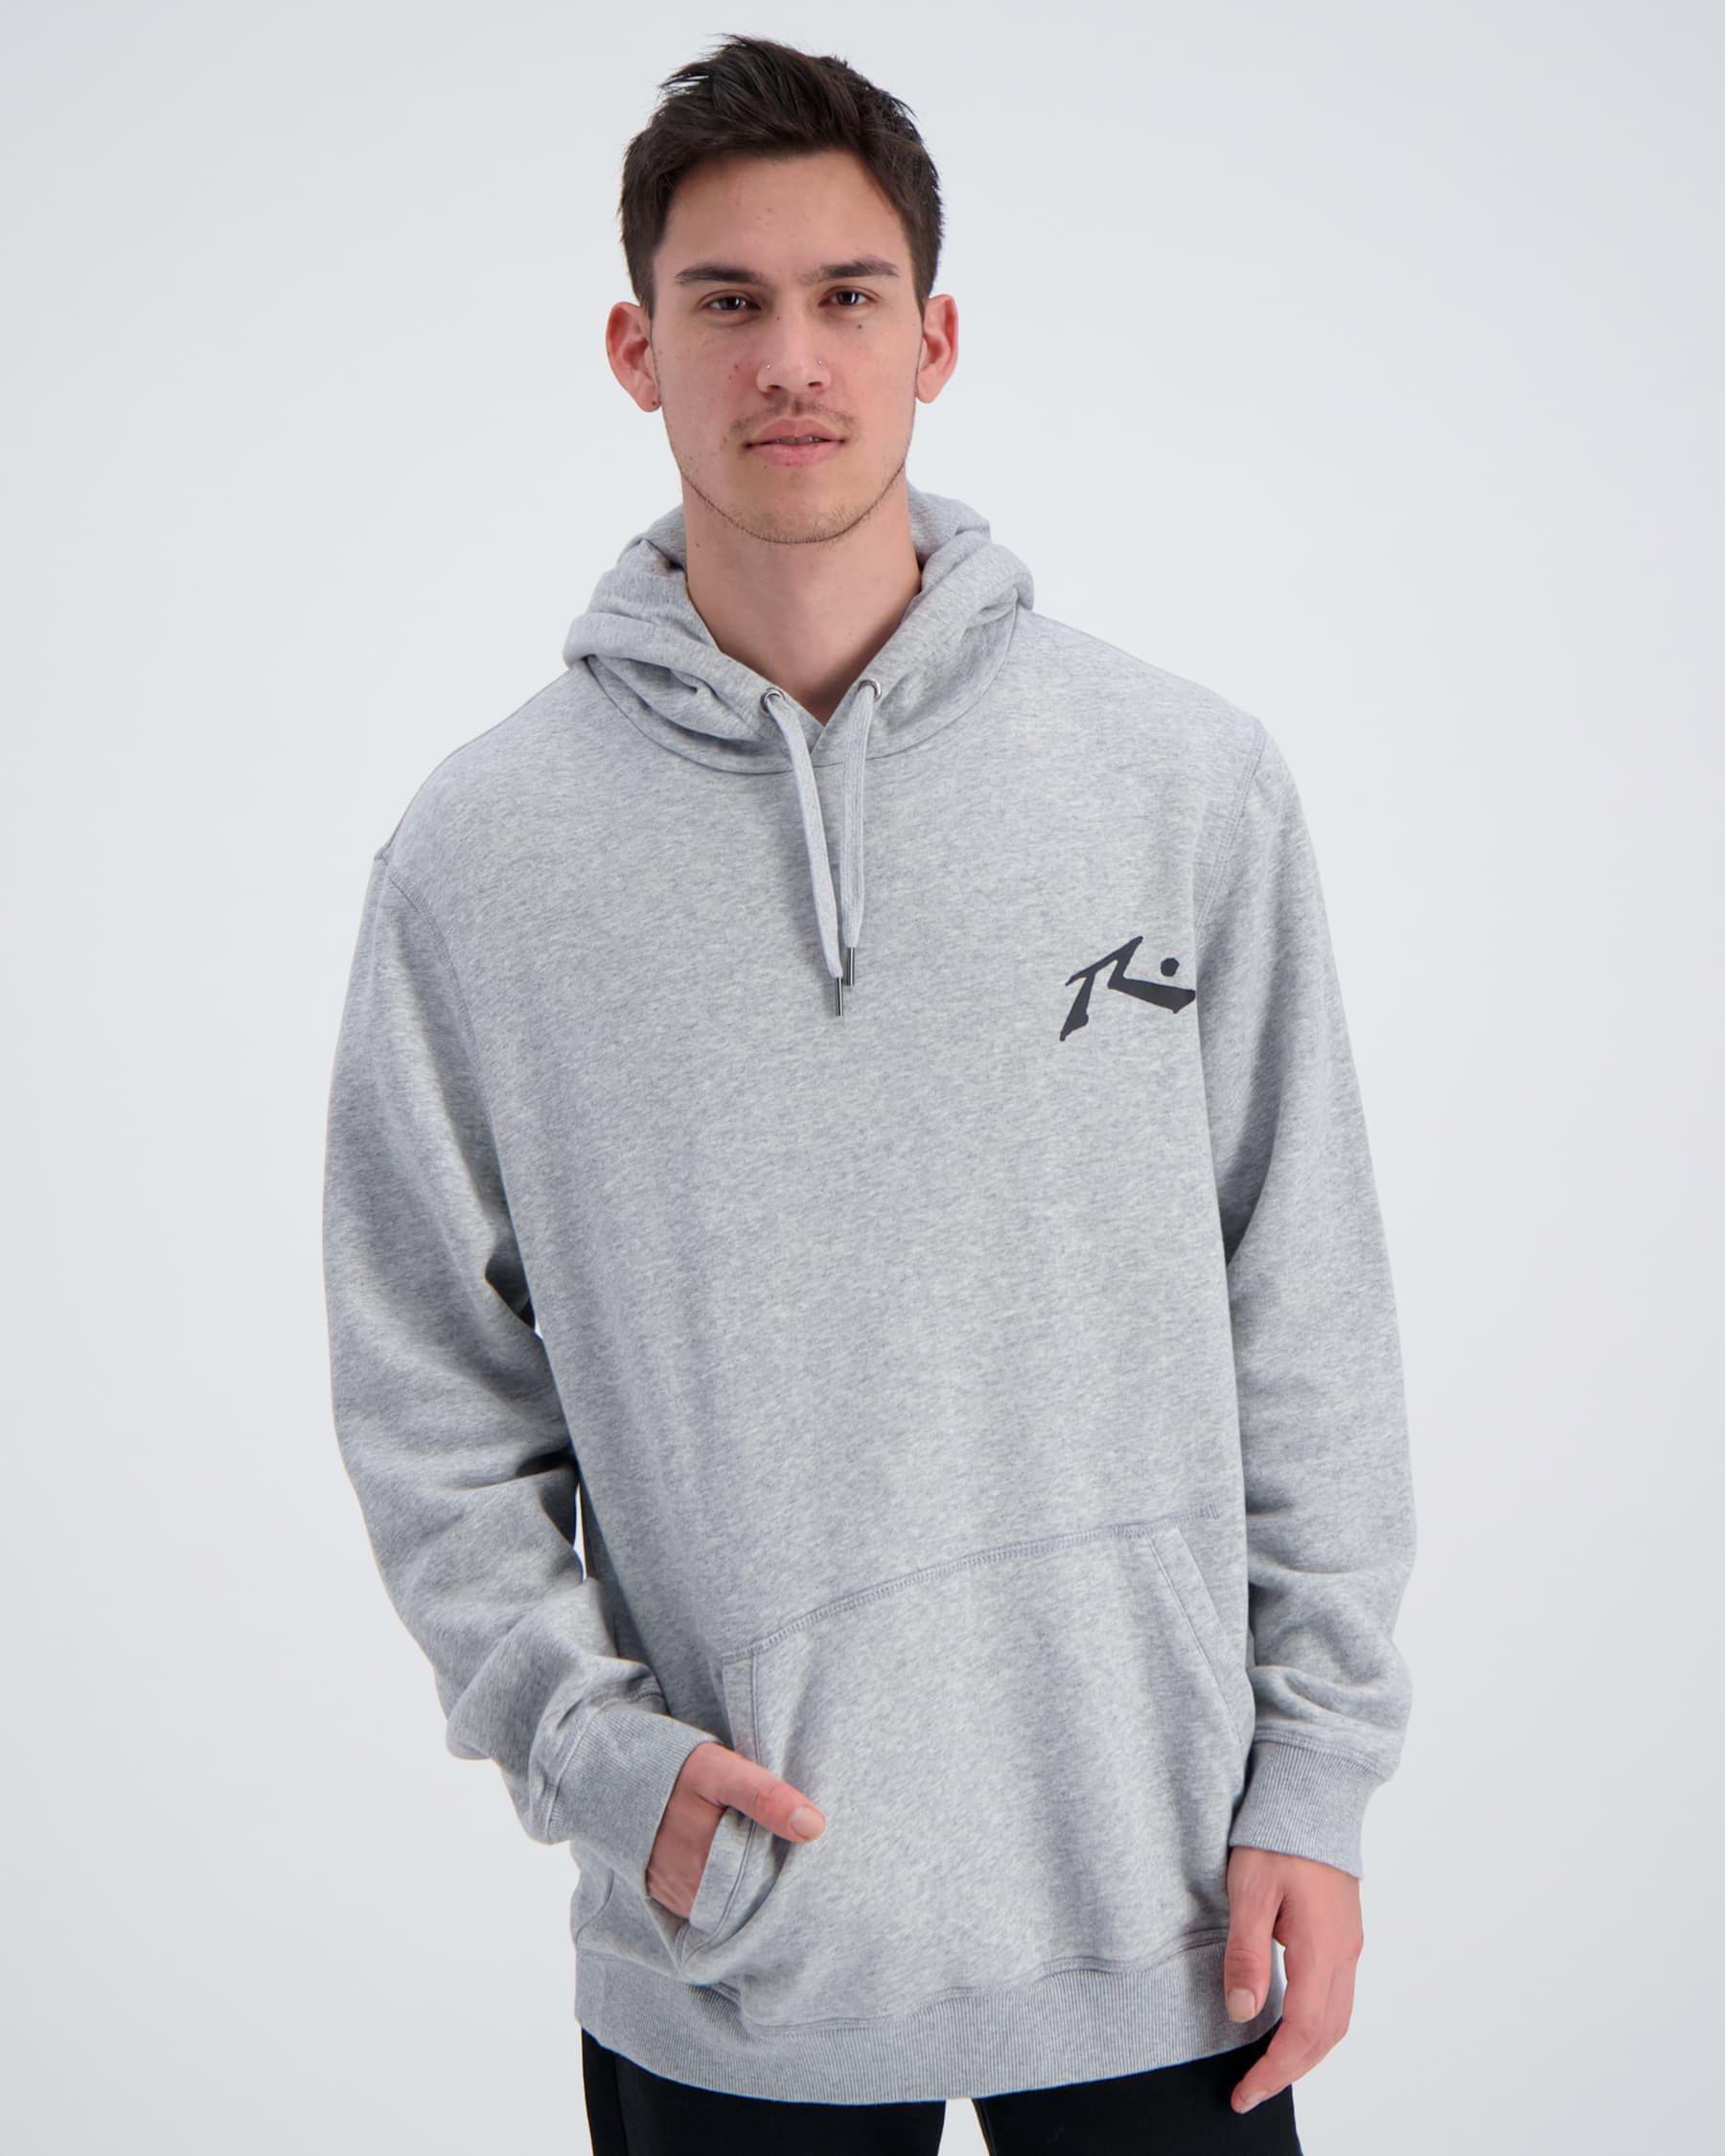 Rusty Competition Hoodie In Grey Marle - Fast Shipping & Easy Returns ...